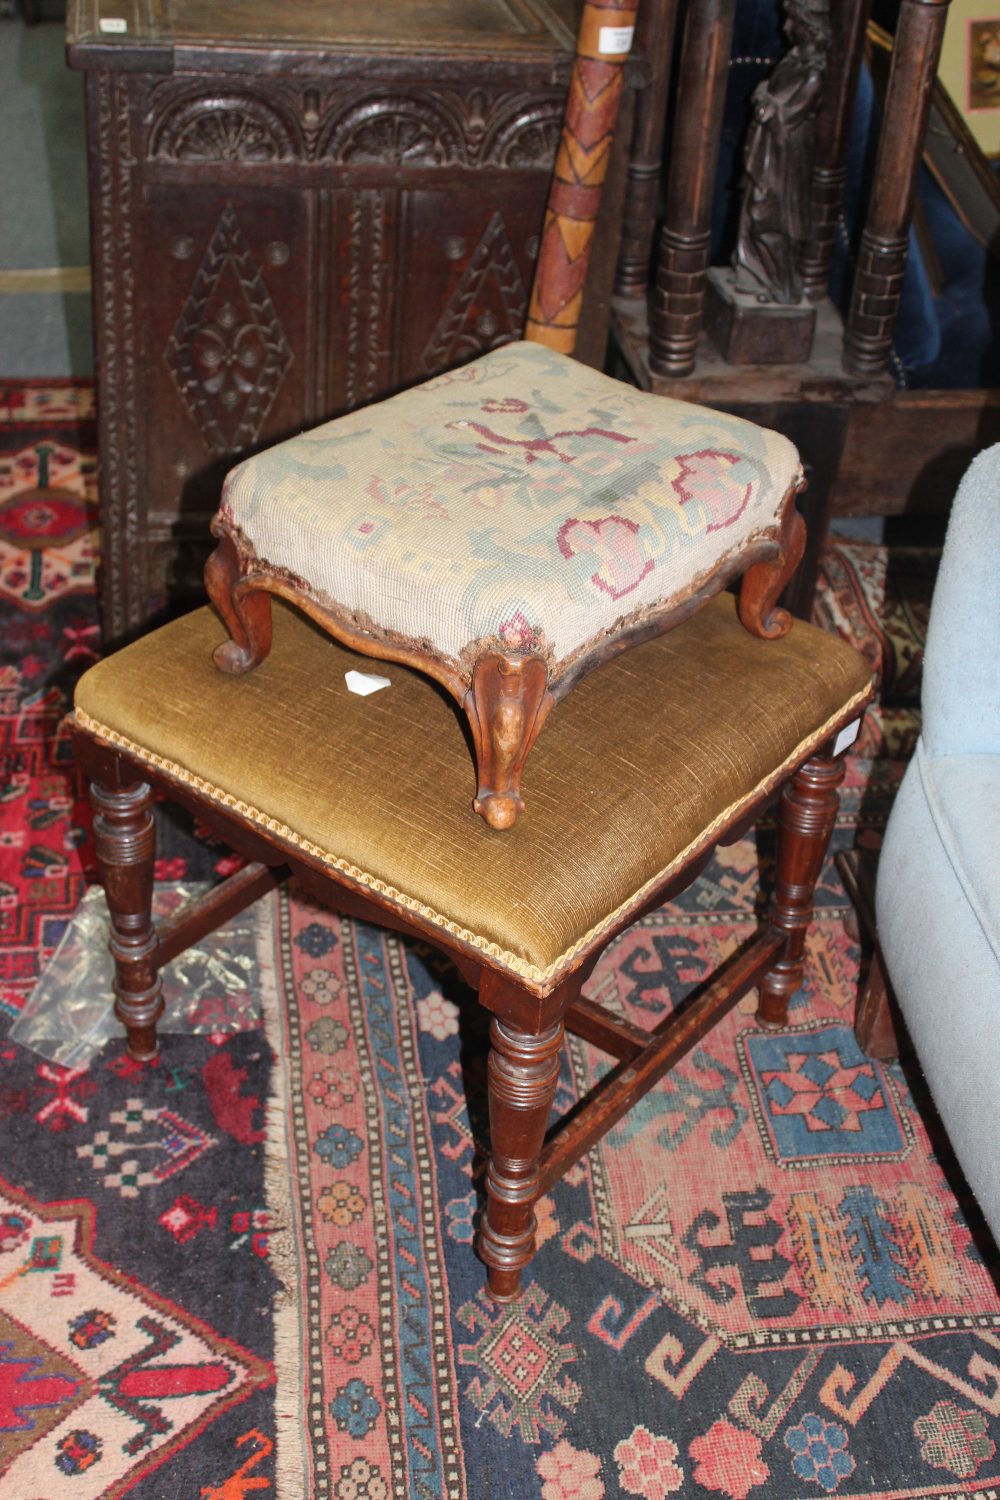 TWO VICTORIAN NEEDLEWORK UPHOLSTERED FOOTSTOOLS together with a Georgian style stool and other 20th